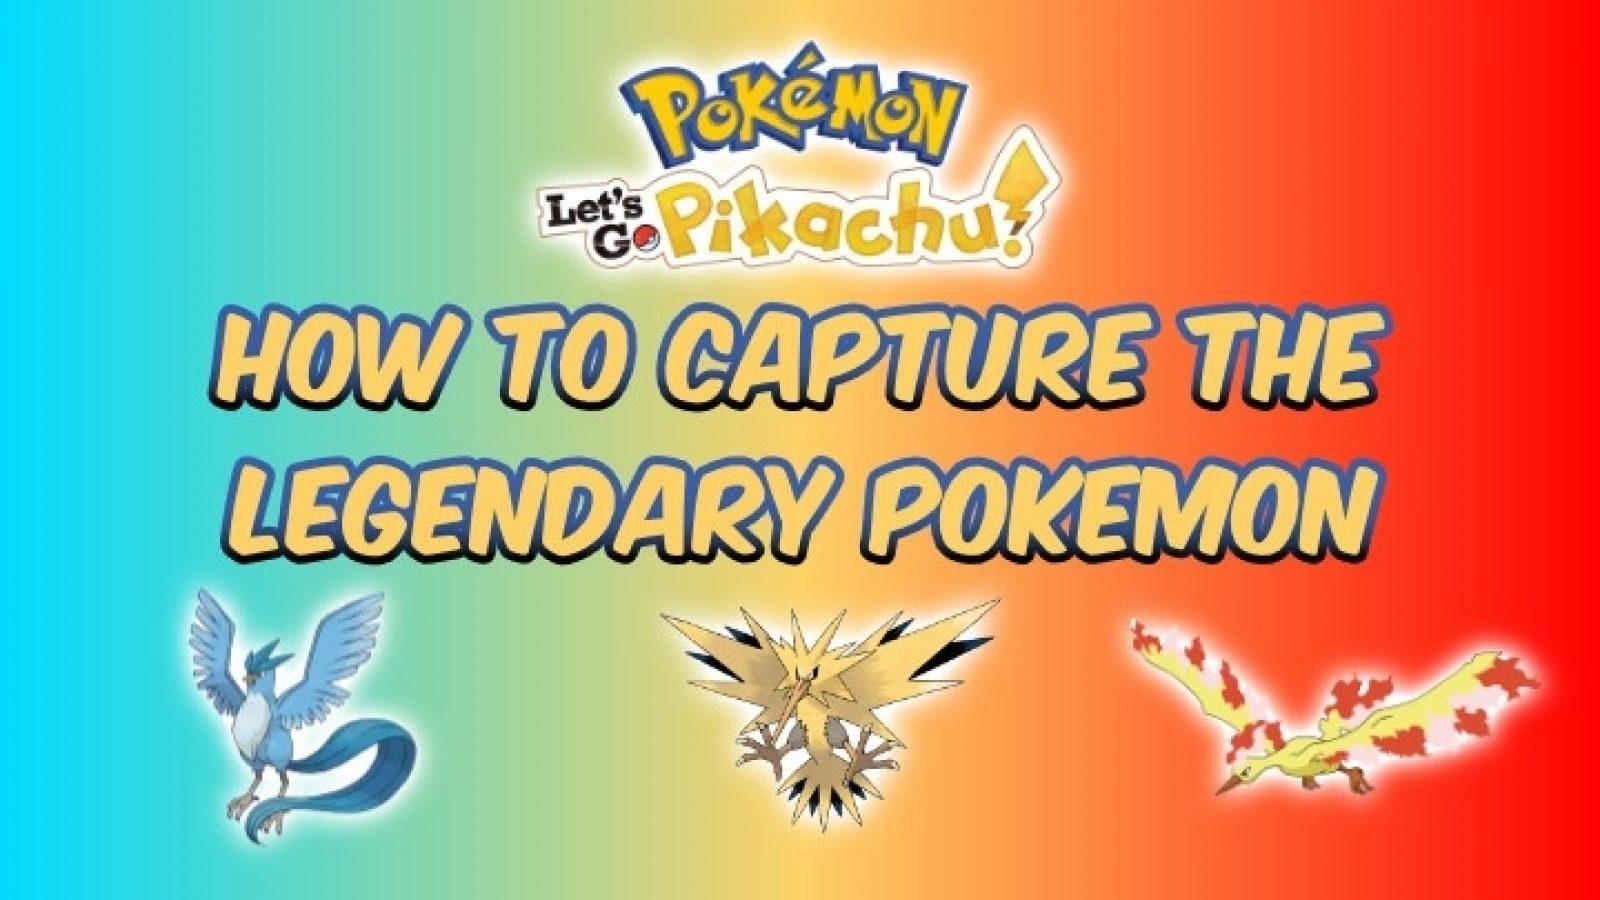 Pokemon Let's Go, How To Catch Mewtwo Guide & Location